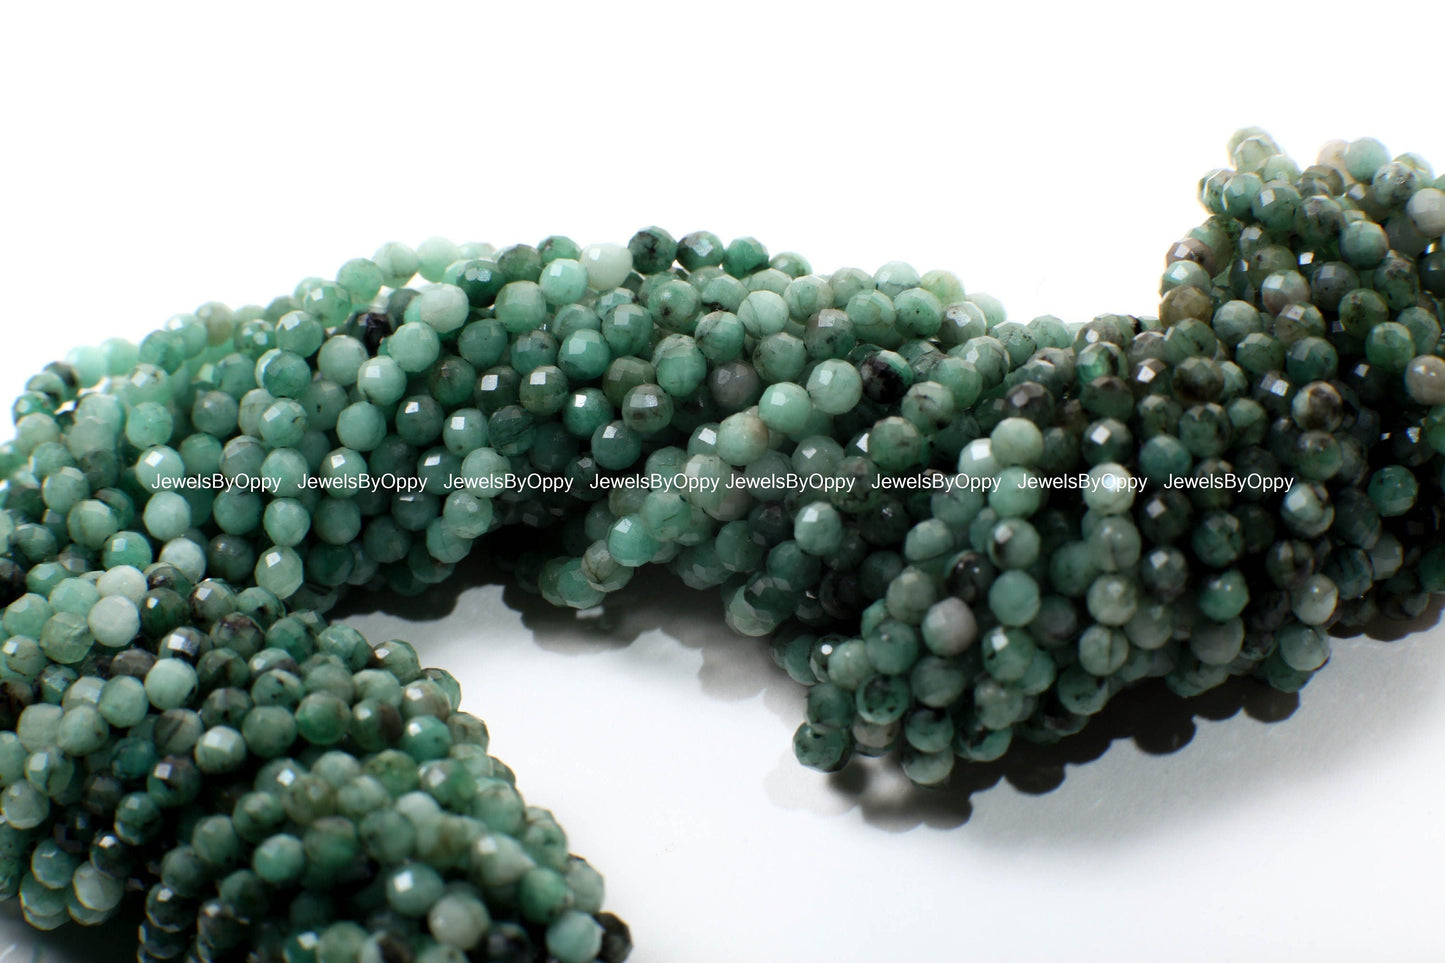 Natural Emerald 3.5mmFaceted Roundel AA for Jewelry Making, Necklace, Bracelet, Gift, Gemstone Green Beads 12.5&quot; Strand